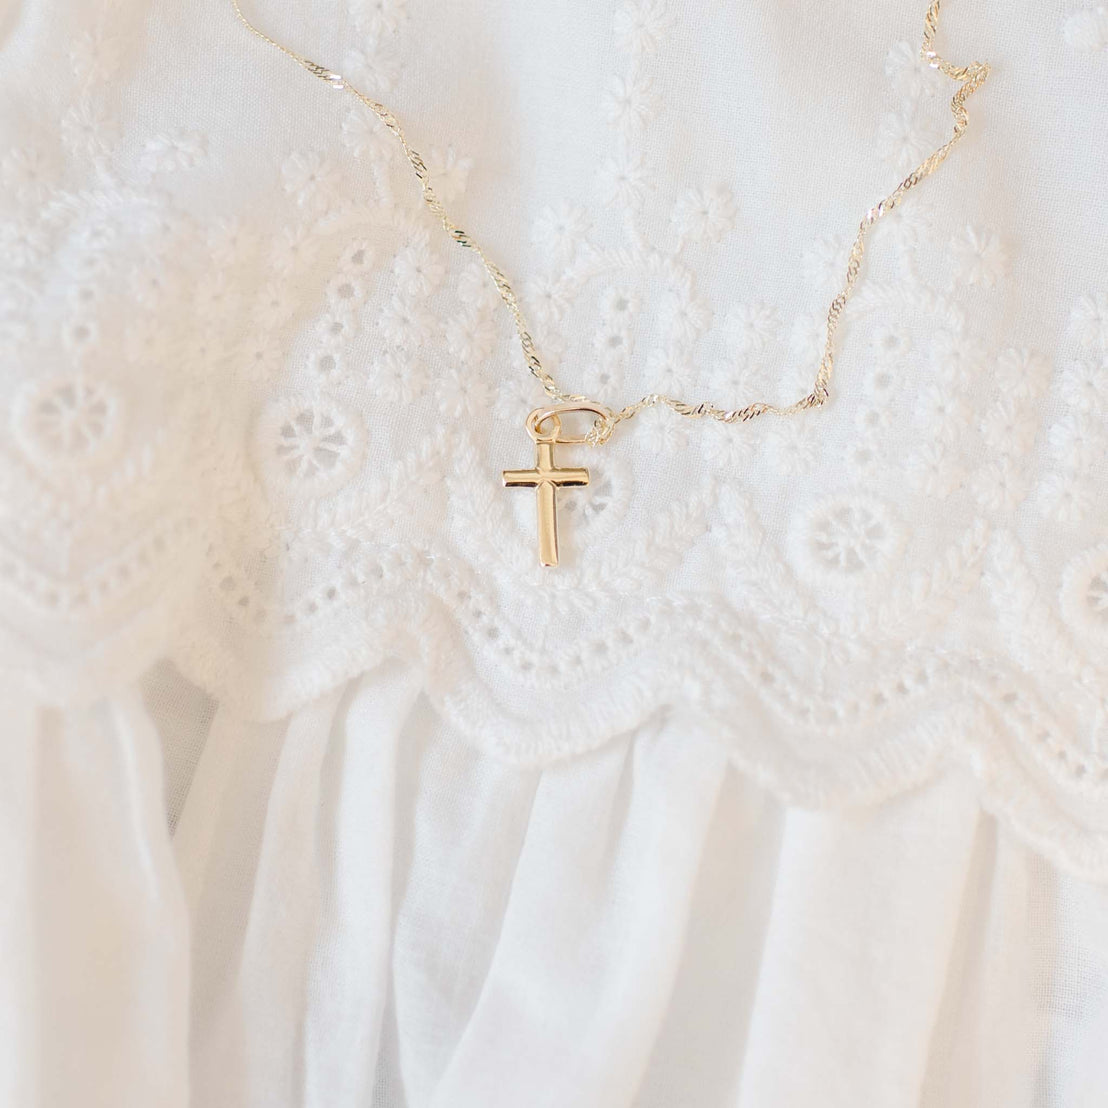 Small gold cross on baby